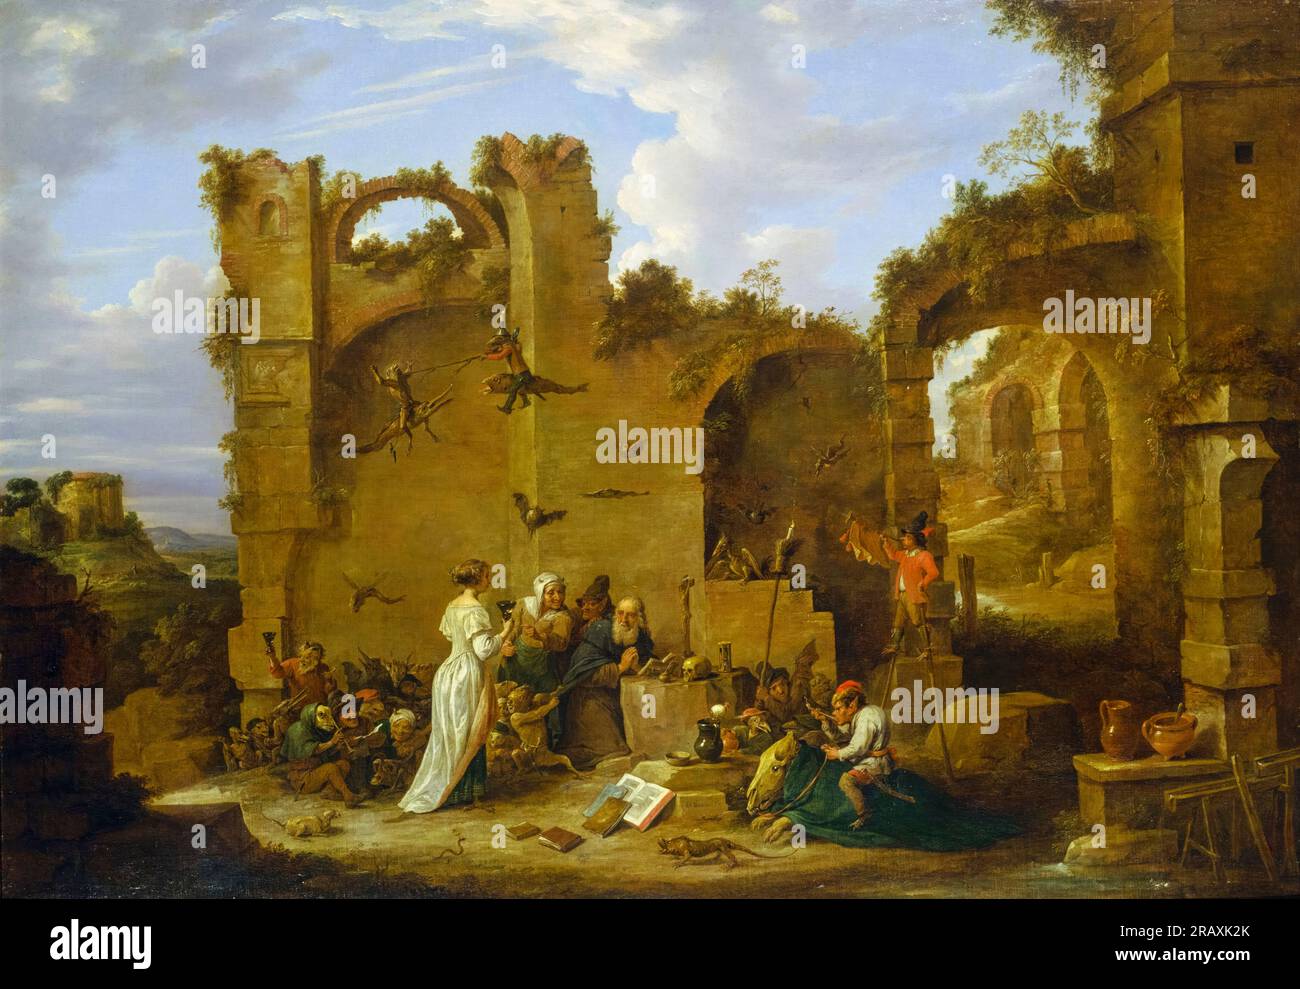 David Teniers the Younger, The Temptation of St Anthony, painting in oil on canvas, before 1690 Stock Photo